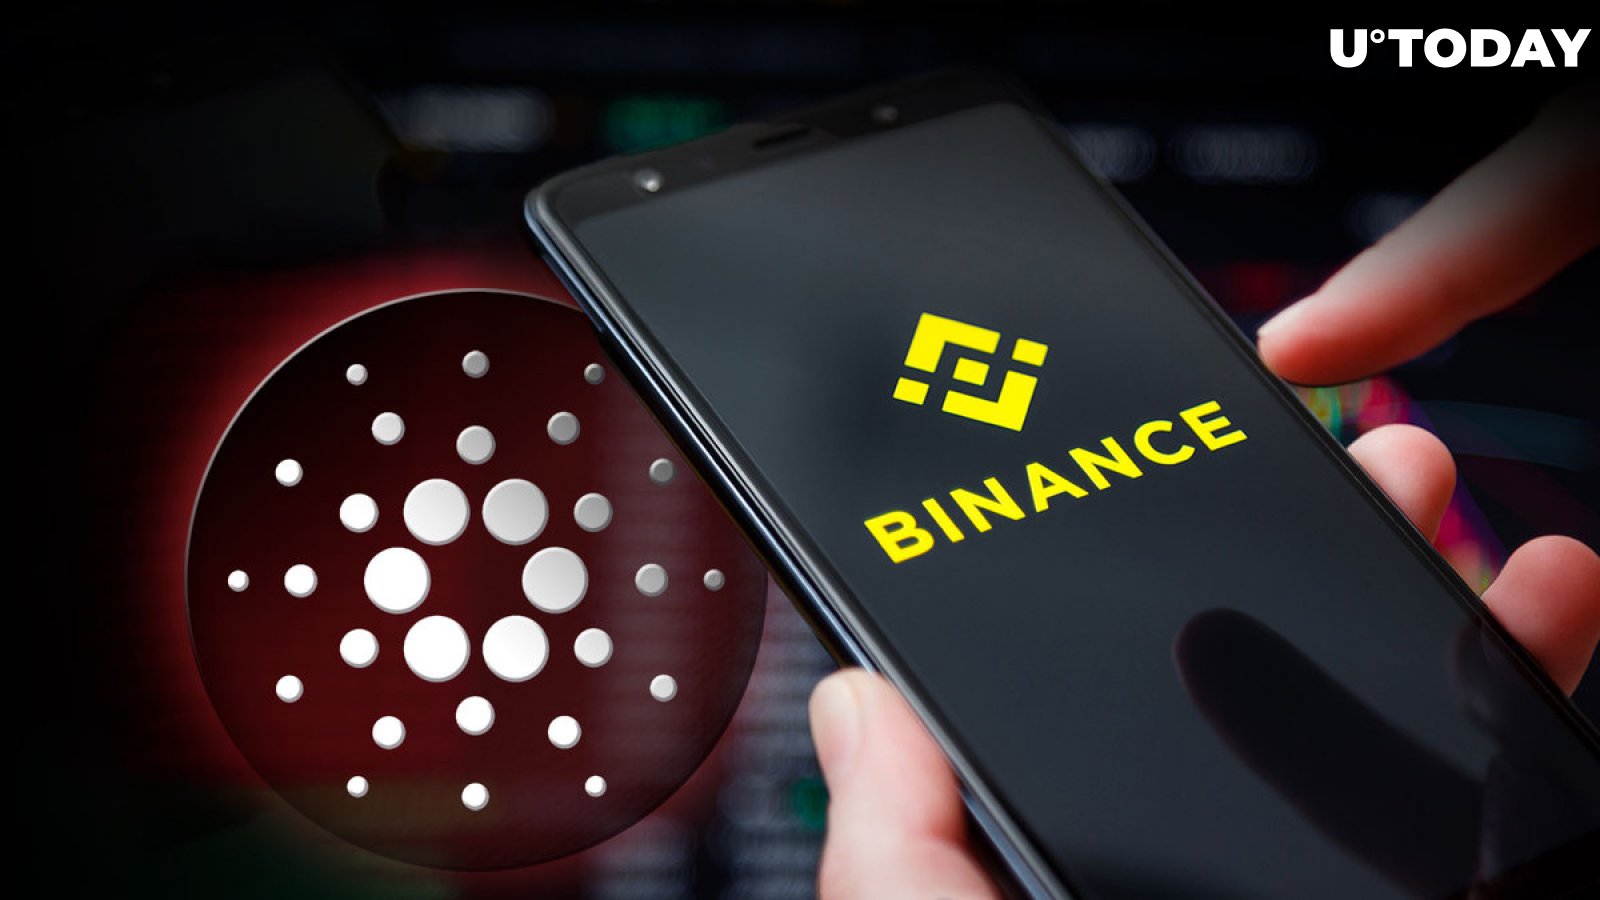 This Cardano (ADA) Pair Removed From Binance